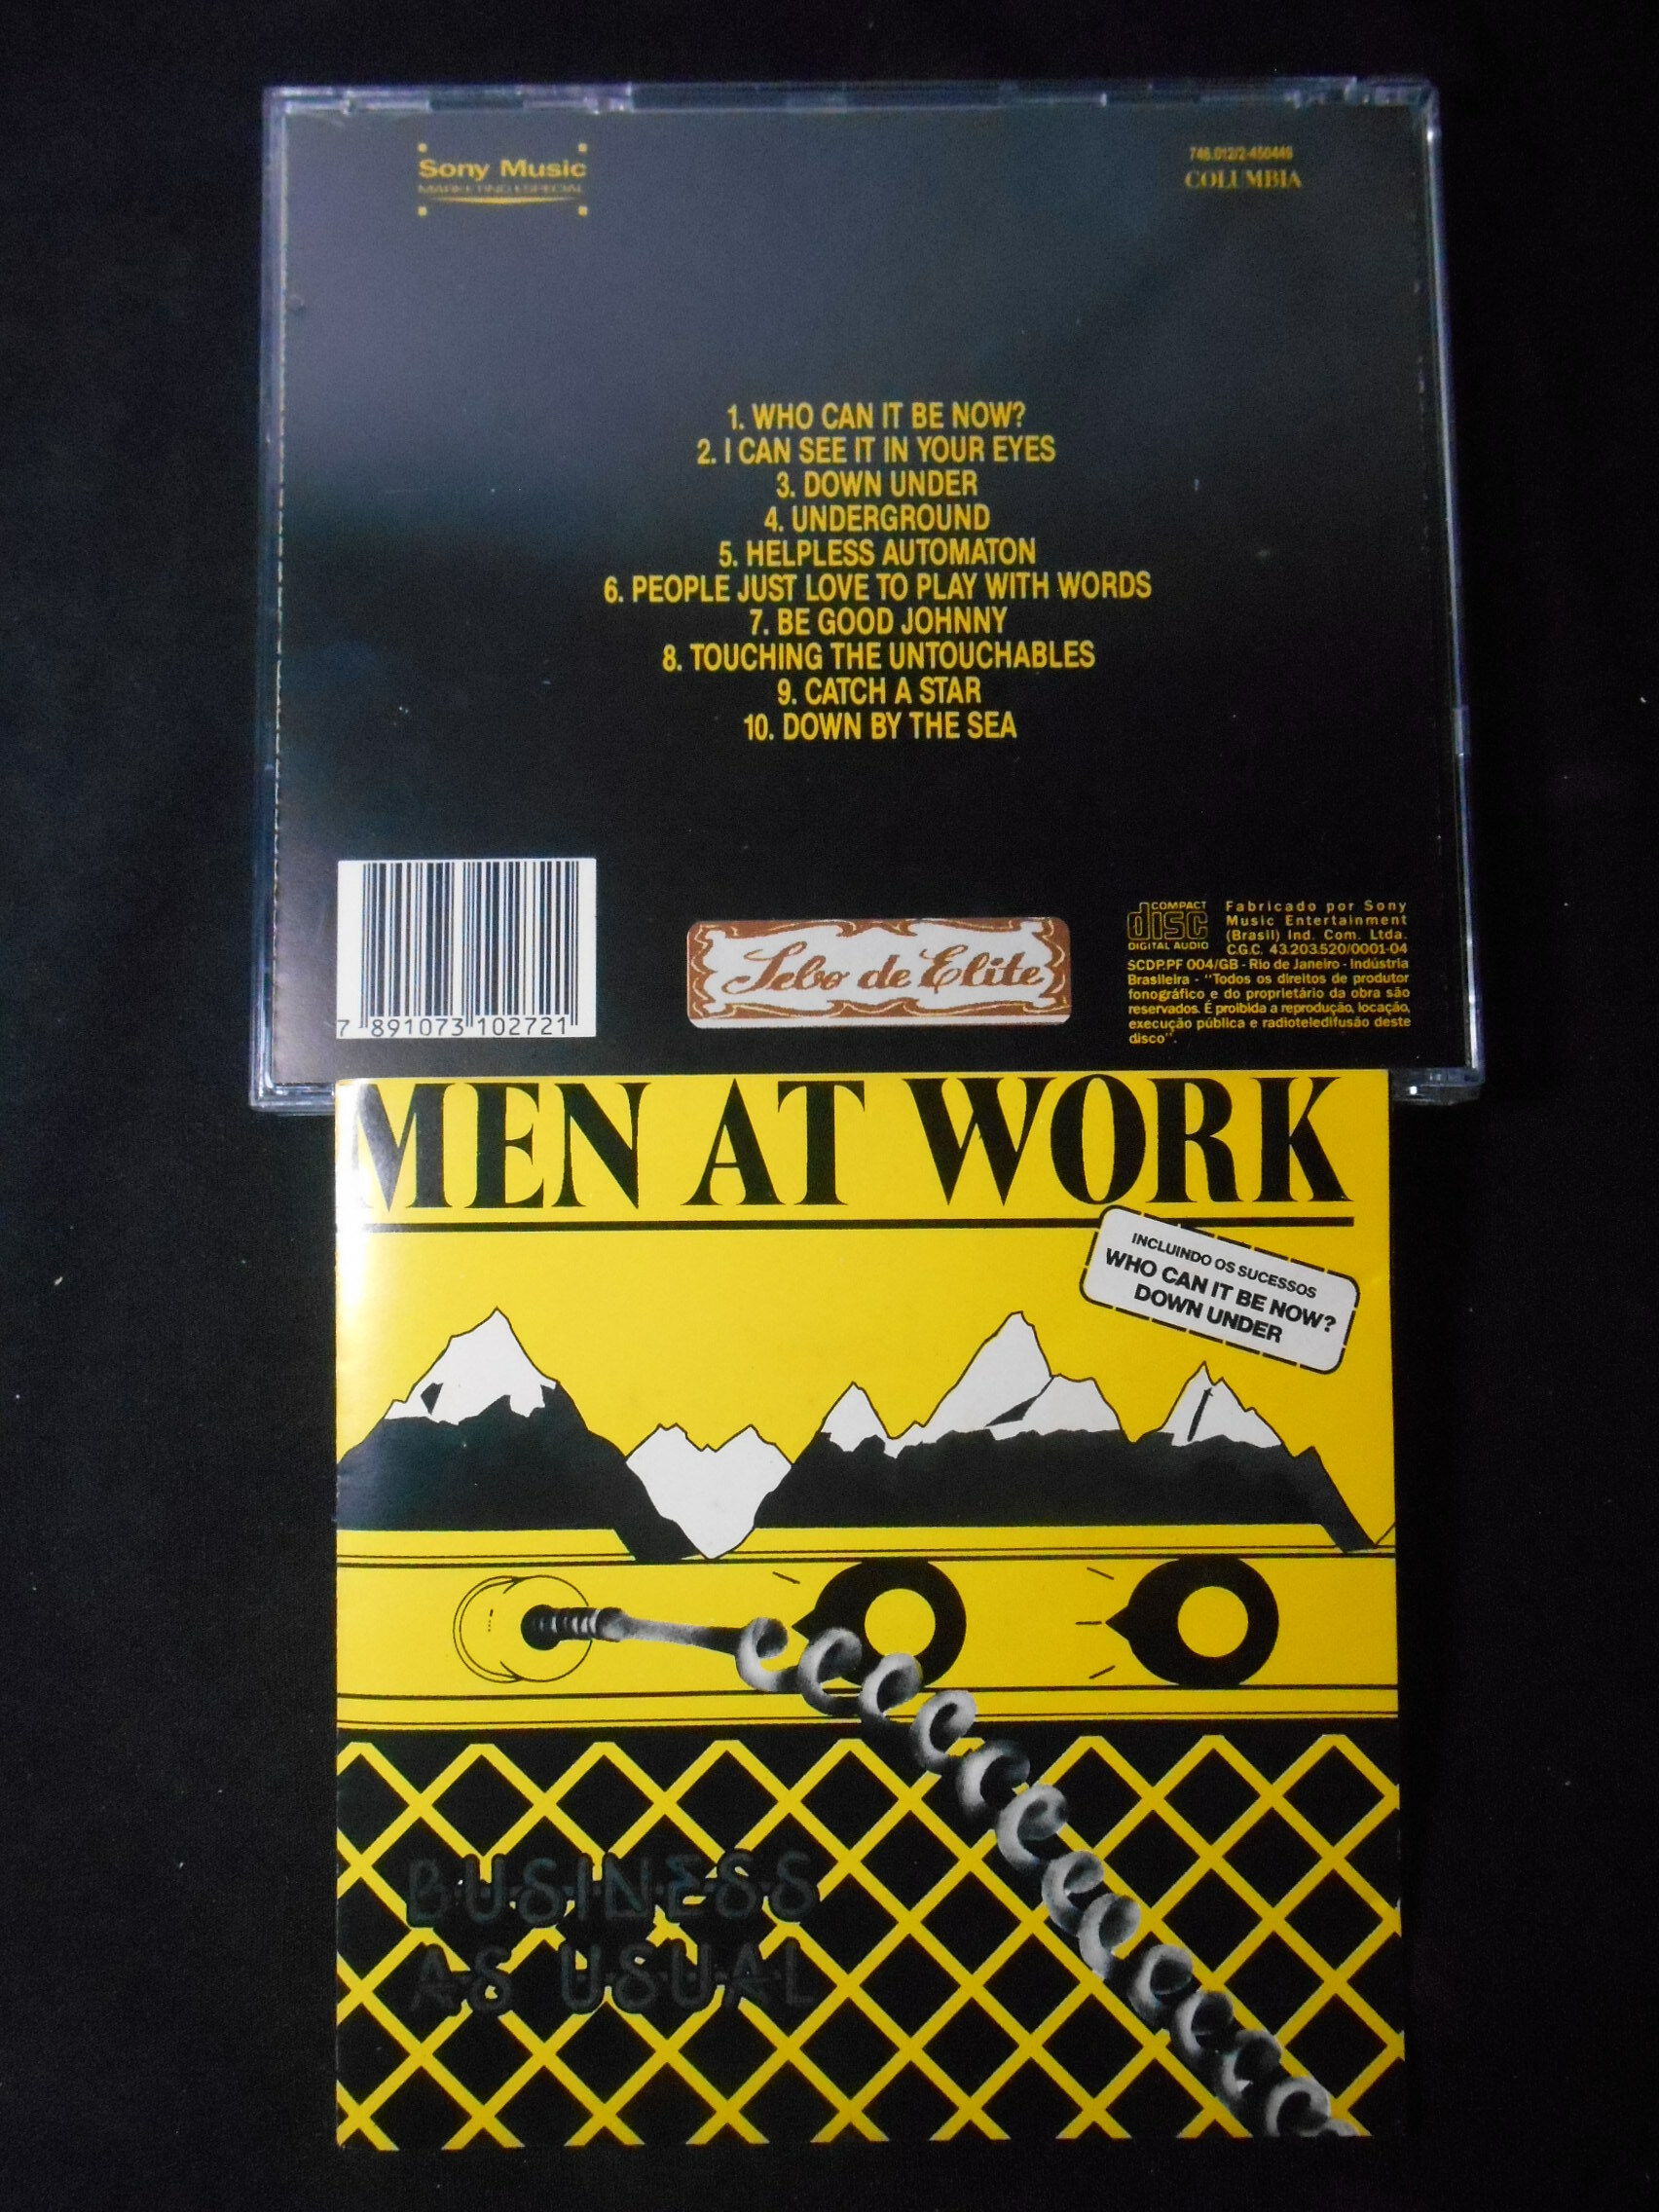 CD - Men at Work - Business as Usual